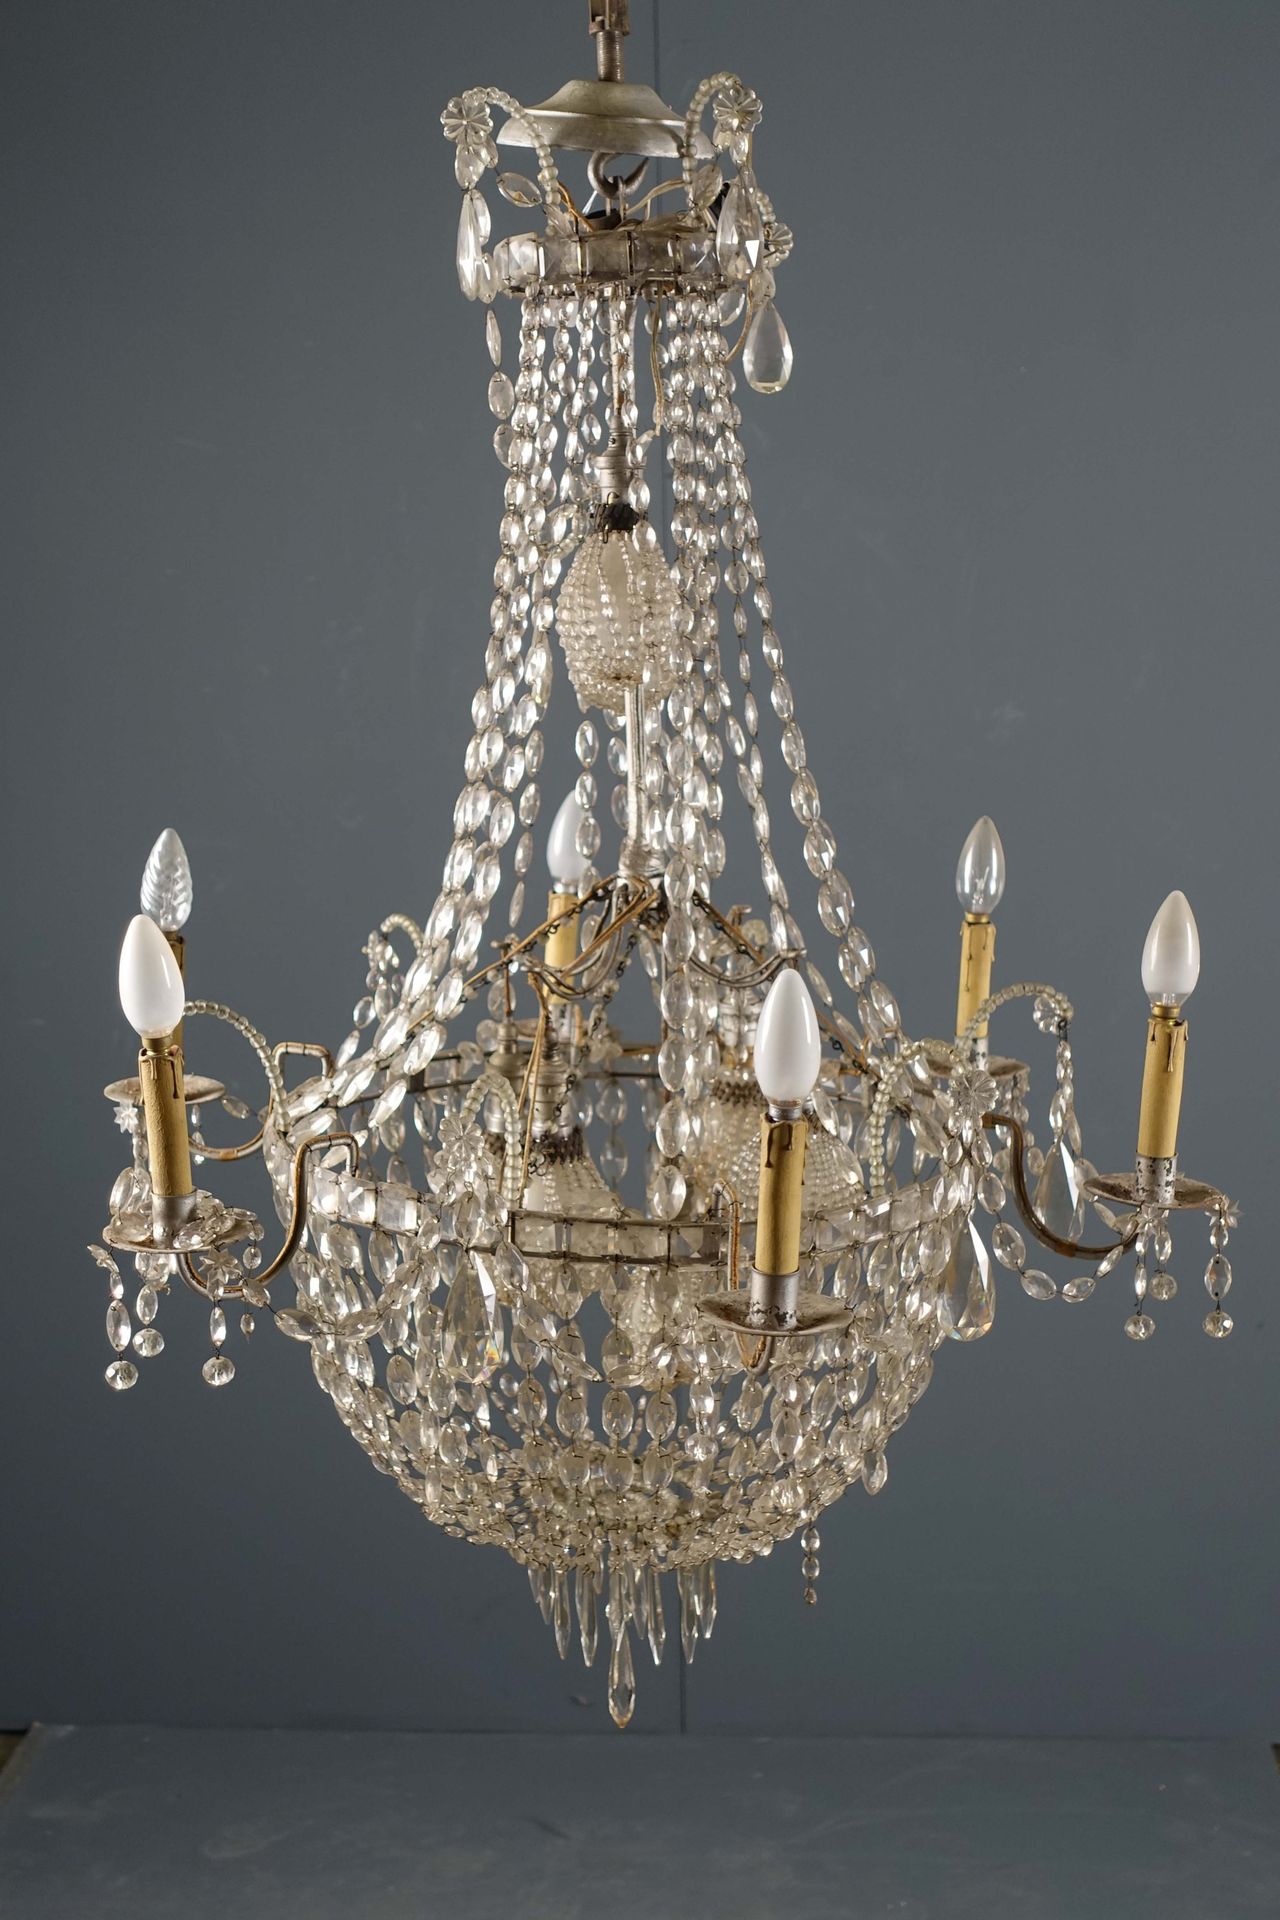 Lustre corbeille. "Bag with pearls" lighting by a crown of six lights and by a c&hellip;